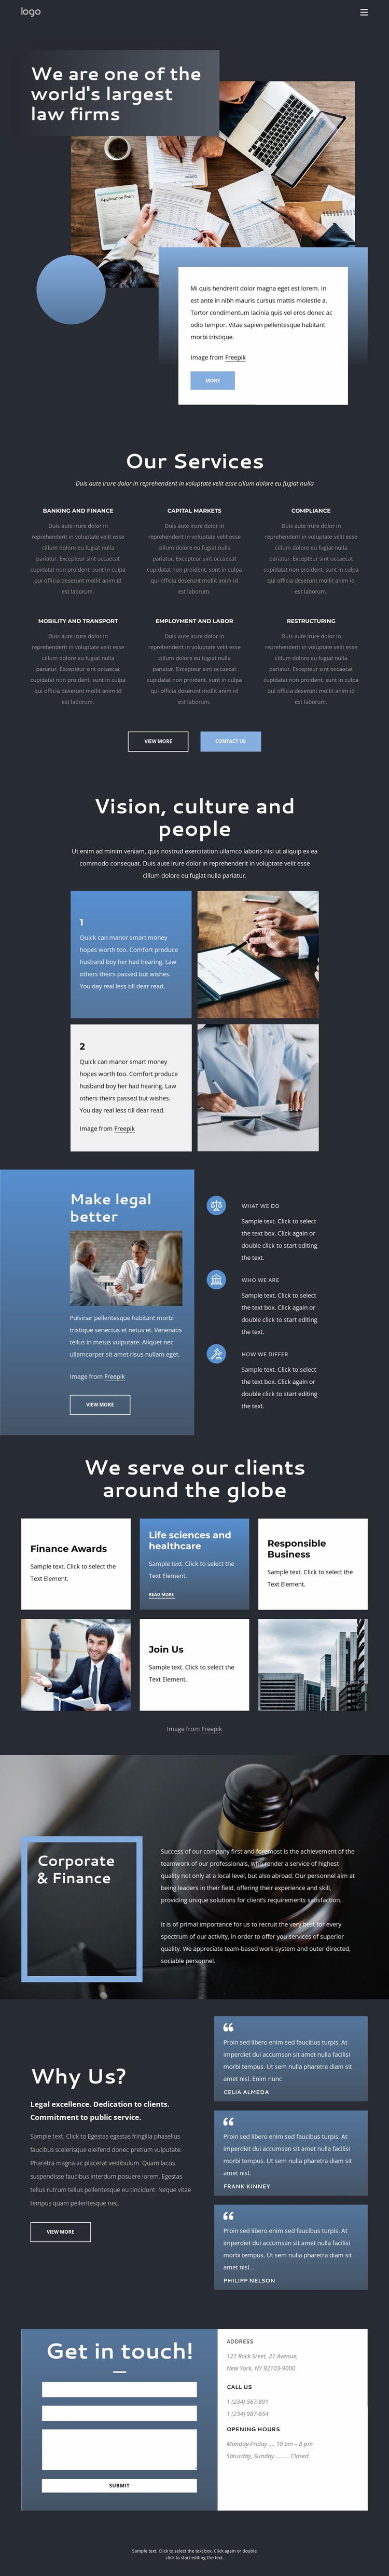 We are an elite law firm Landing Page